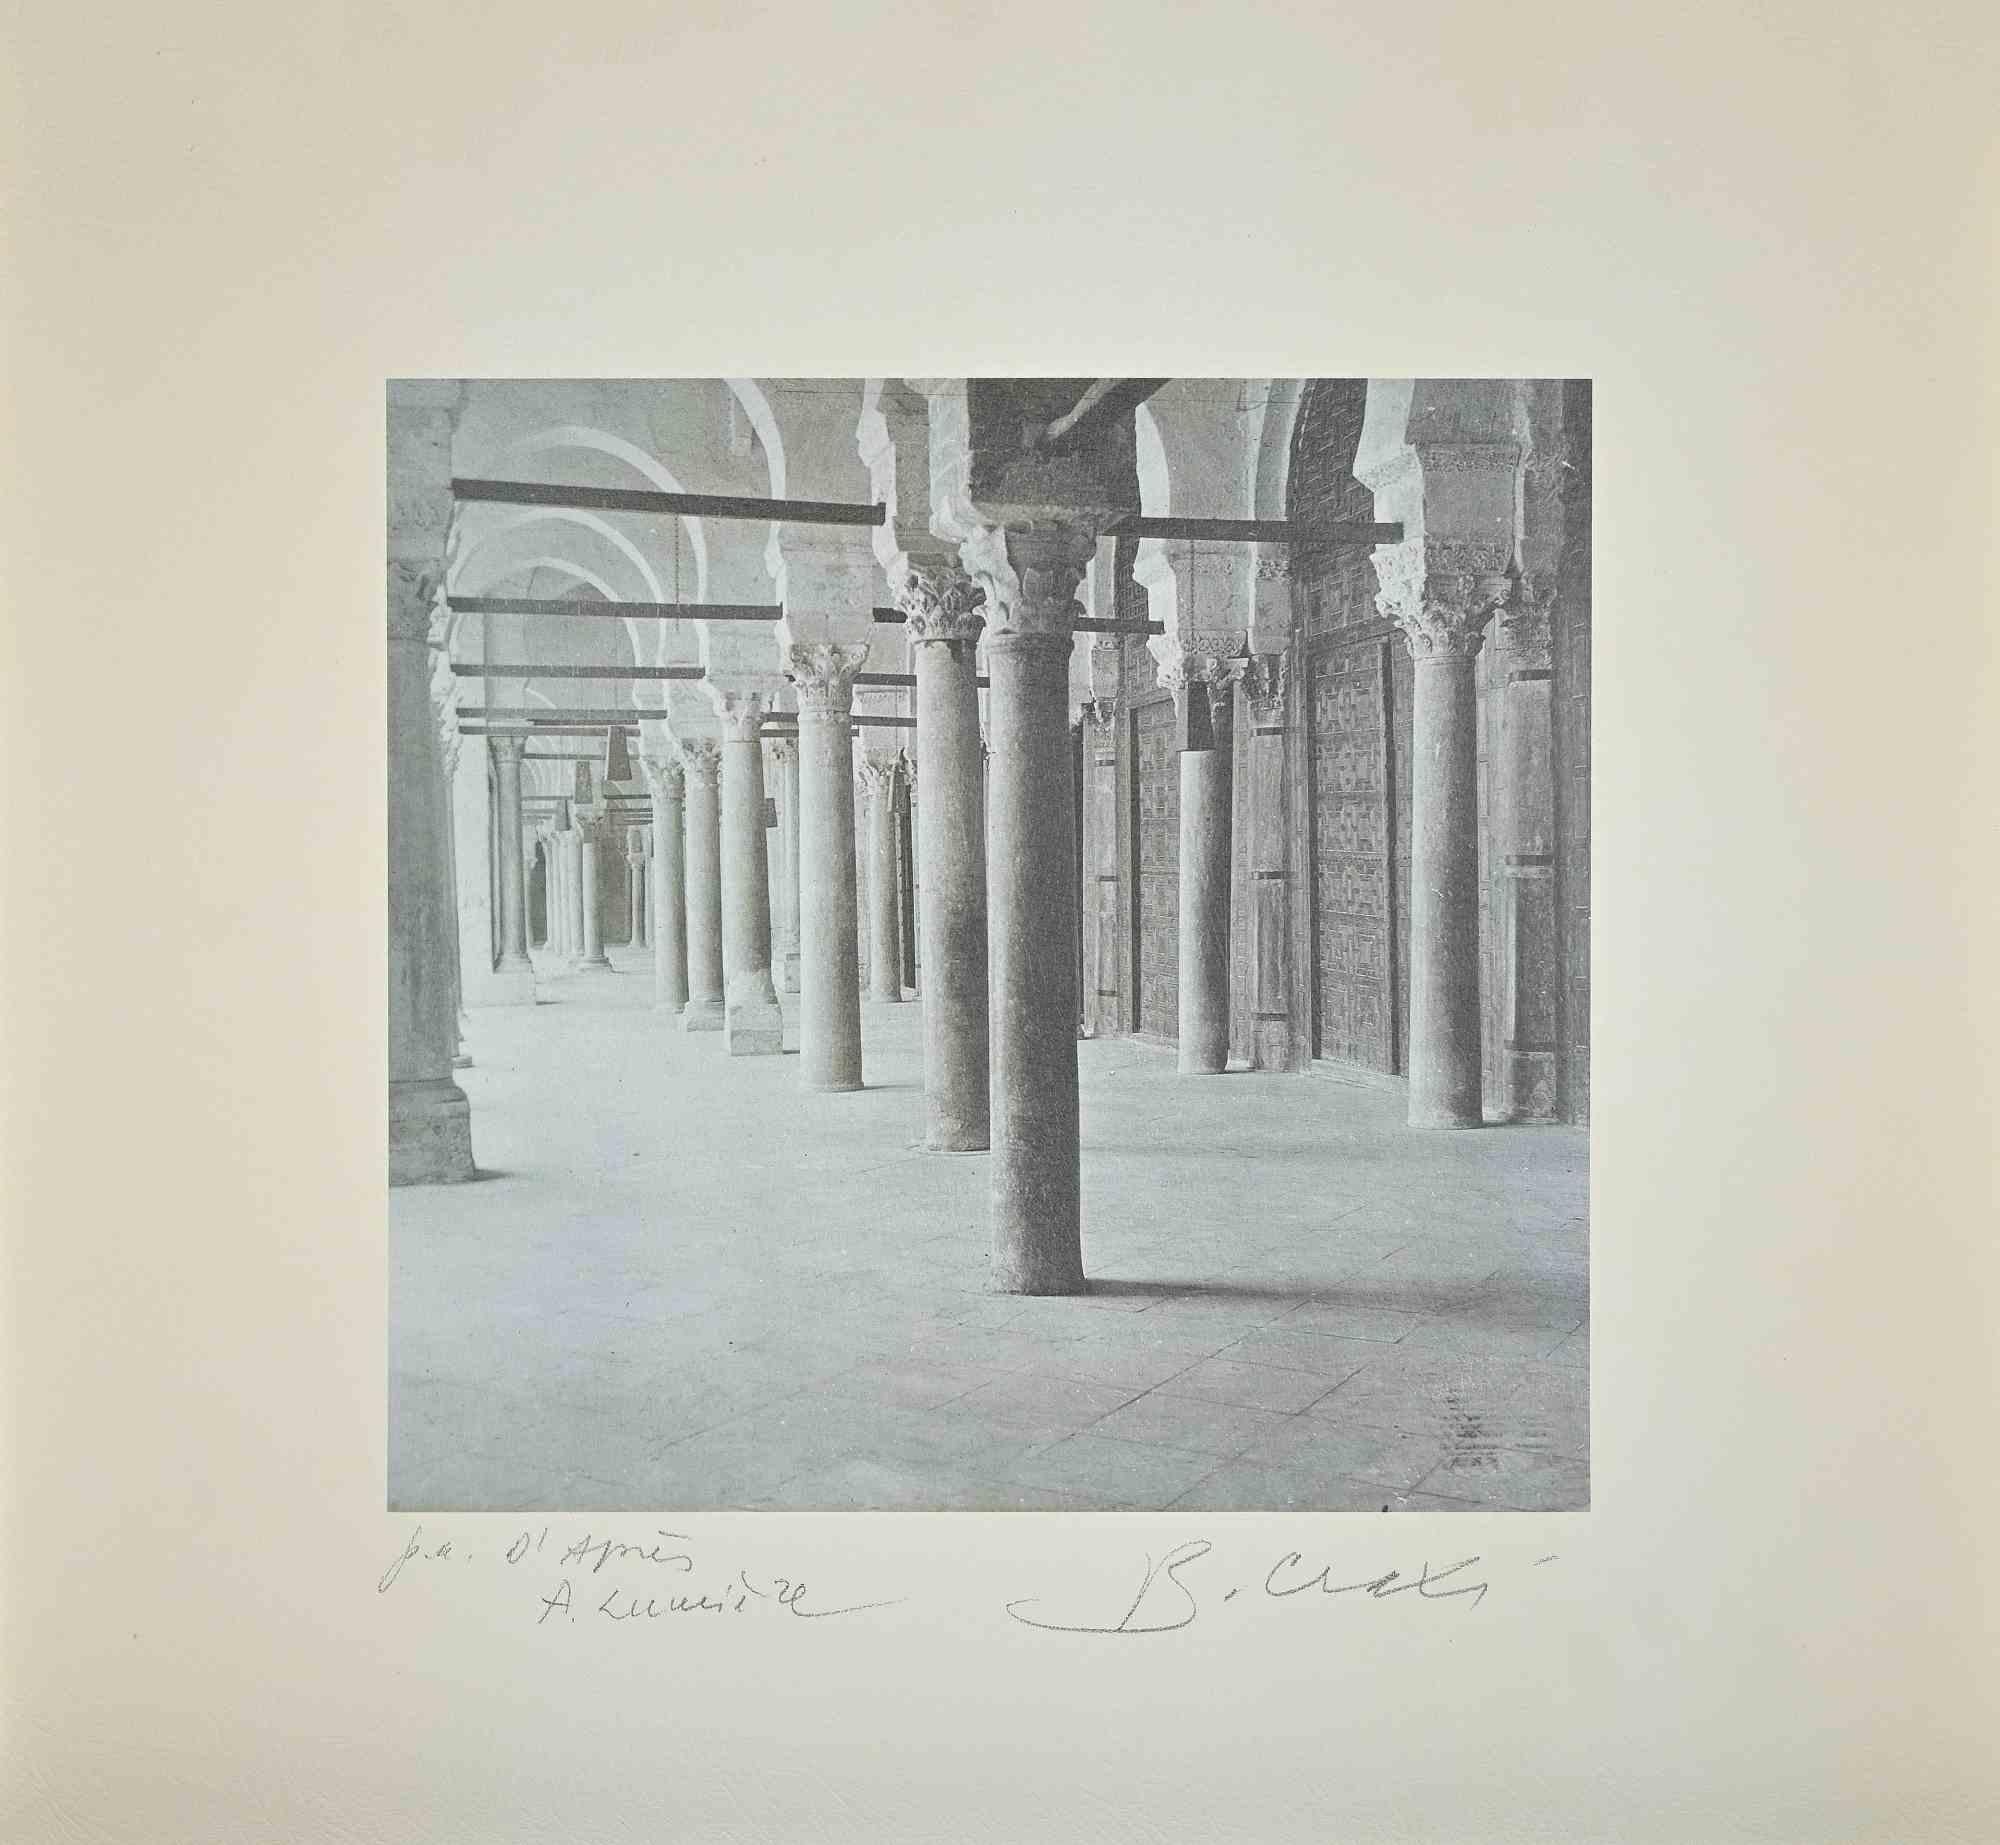 Tunisian Architecture is an original photolithography realized by Bettino Craxi in 1995.

Hand-signed and artist's proof. Published in the portfolio: "Tunisiaca 1995: d'aprés Auguste Lumière".

Good conditions.
